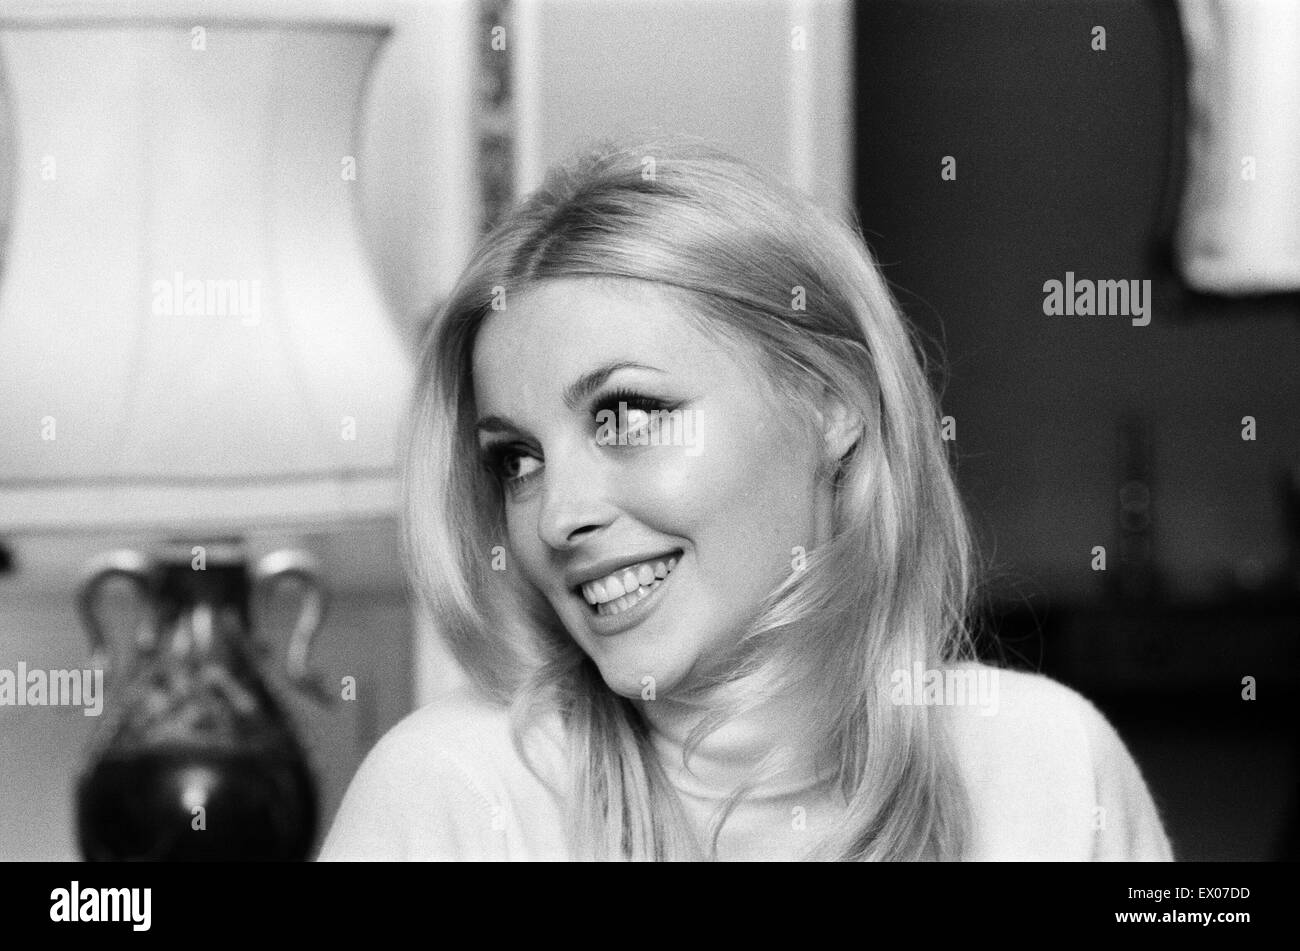 Sharon Tate, Actress and Model, aged 22 years old, pictured at her apartment in Belgravia, London, Friday 15th October 1965. Stock Photo